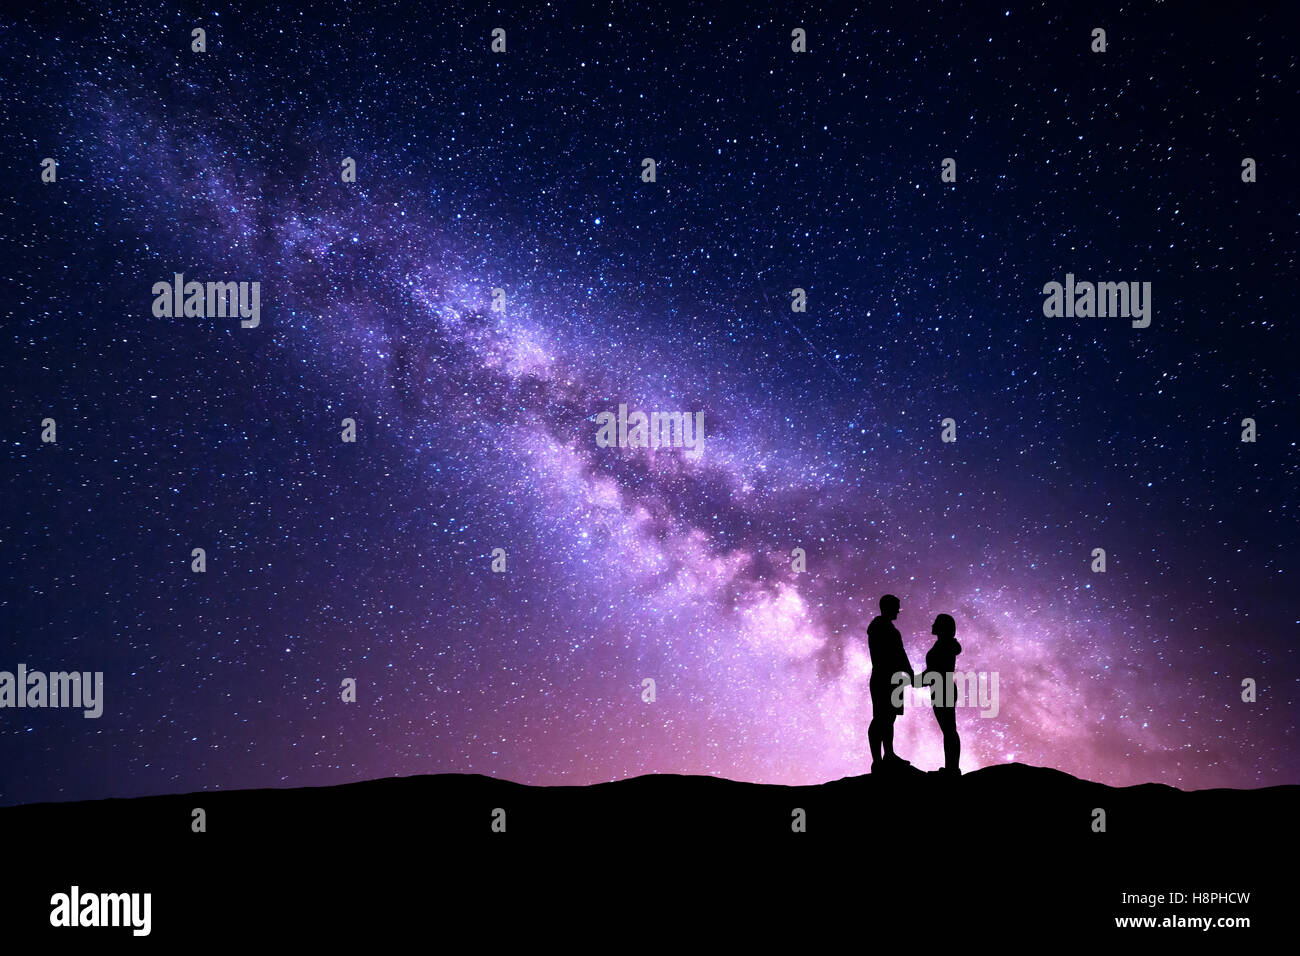 Milky Way with silhouette of people. Landscape with night sky with stars and standing man and woman holding hands on the mountai Stock Photo